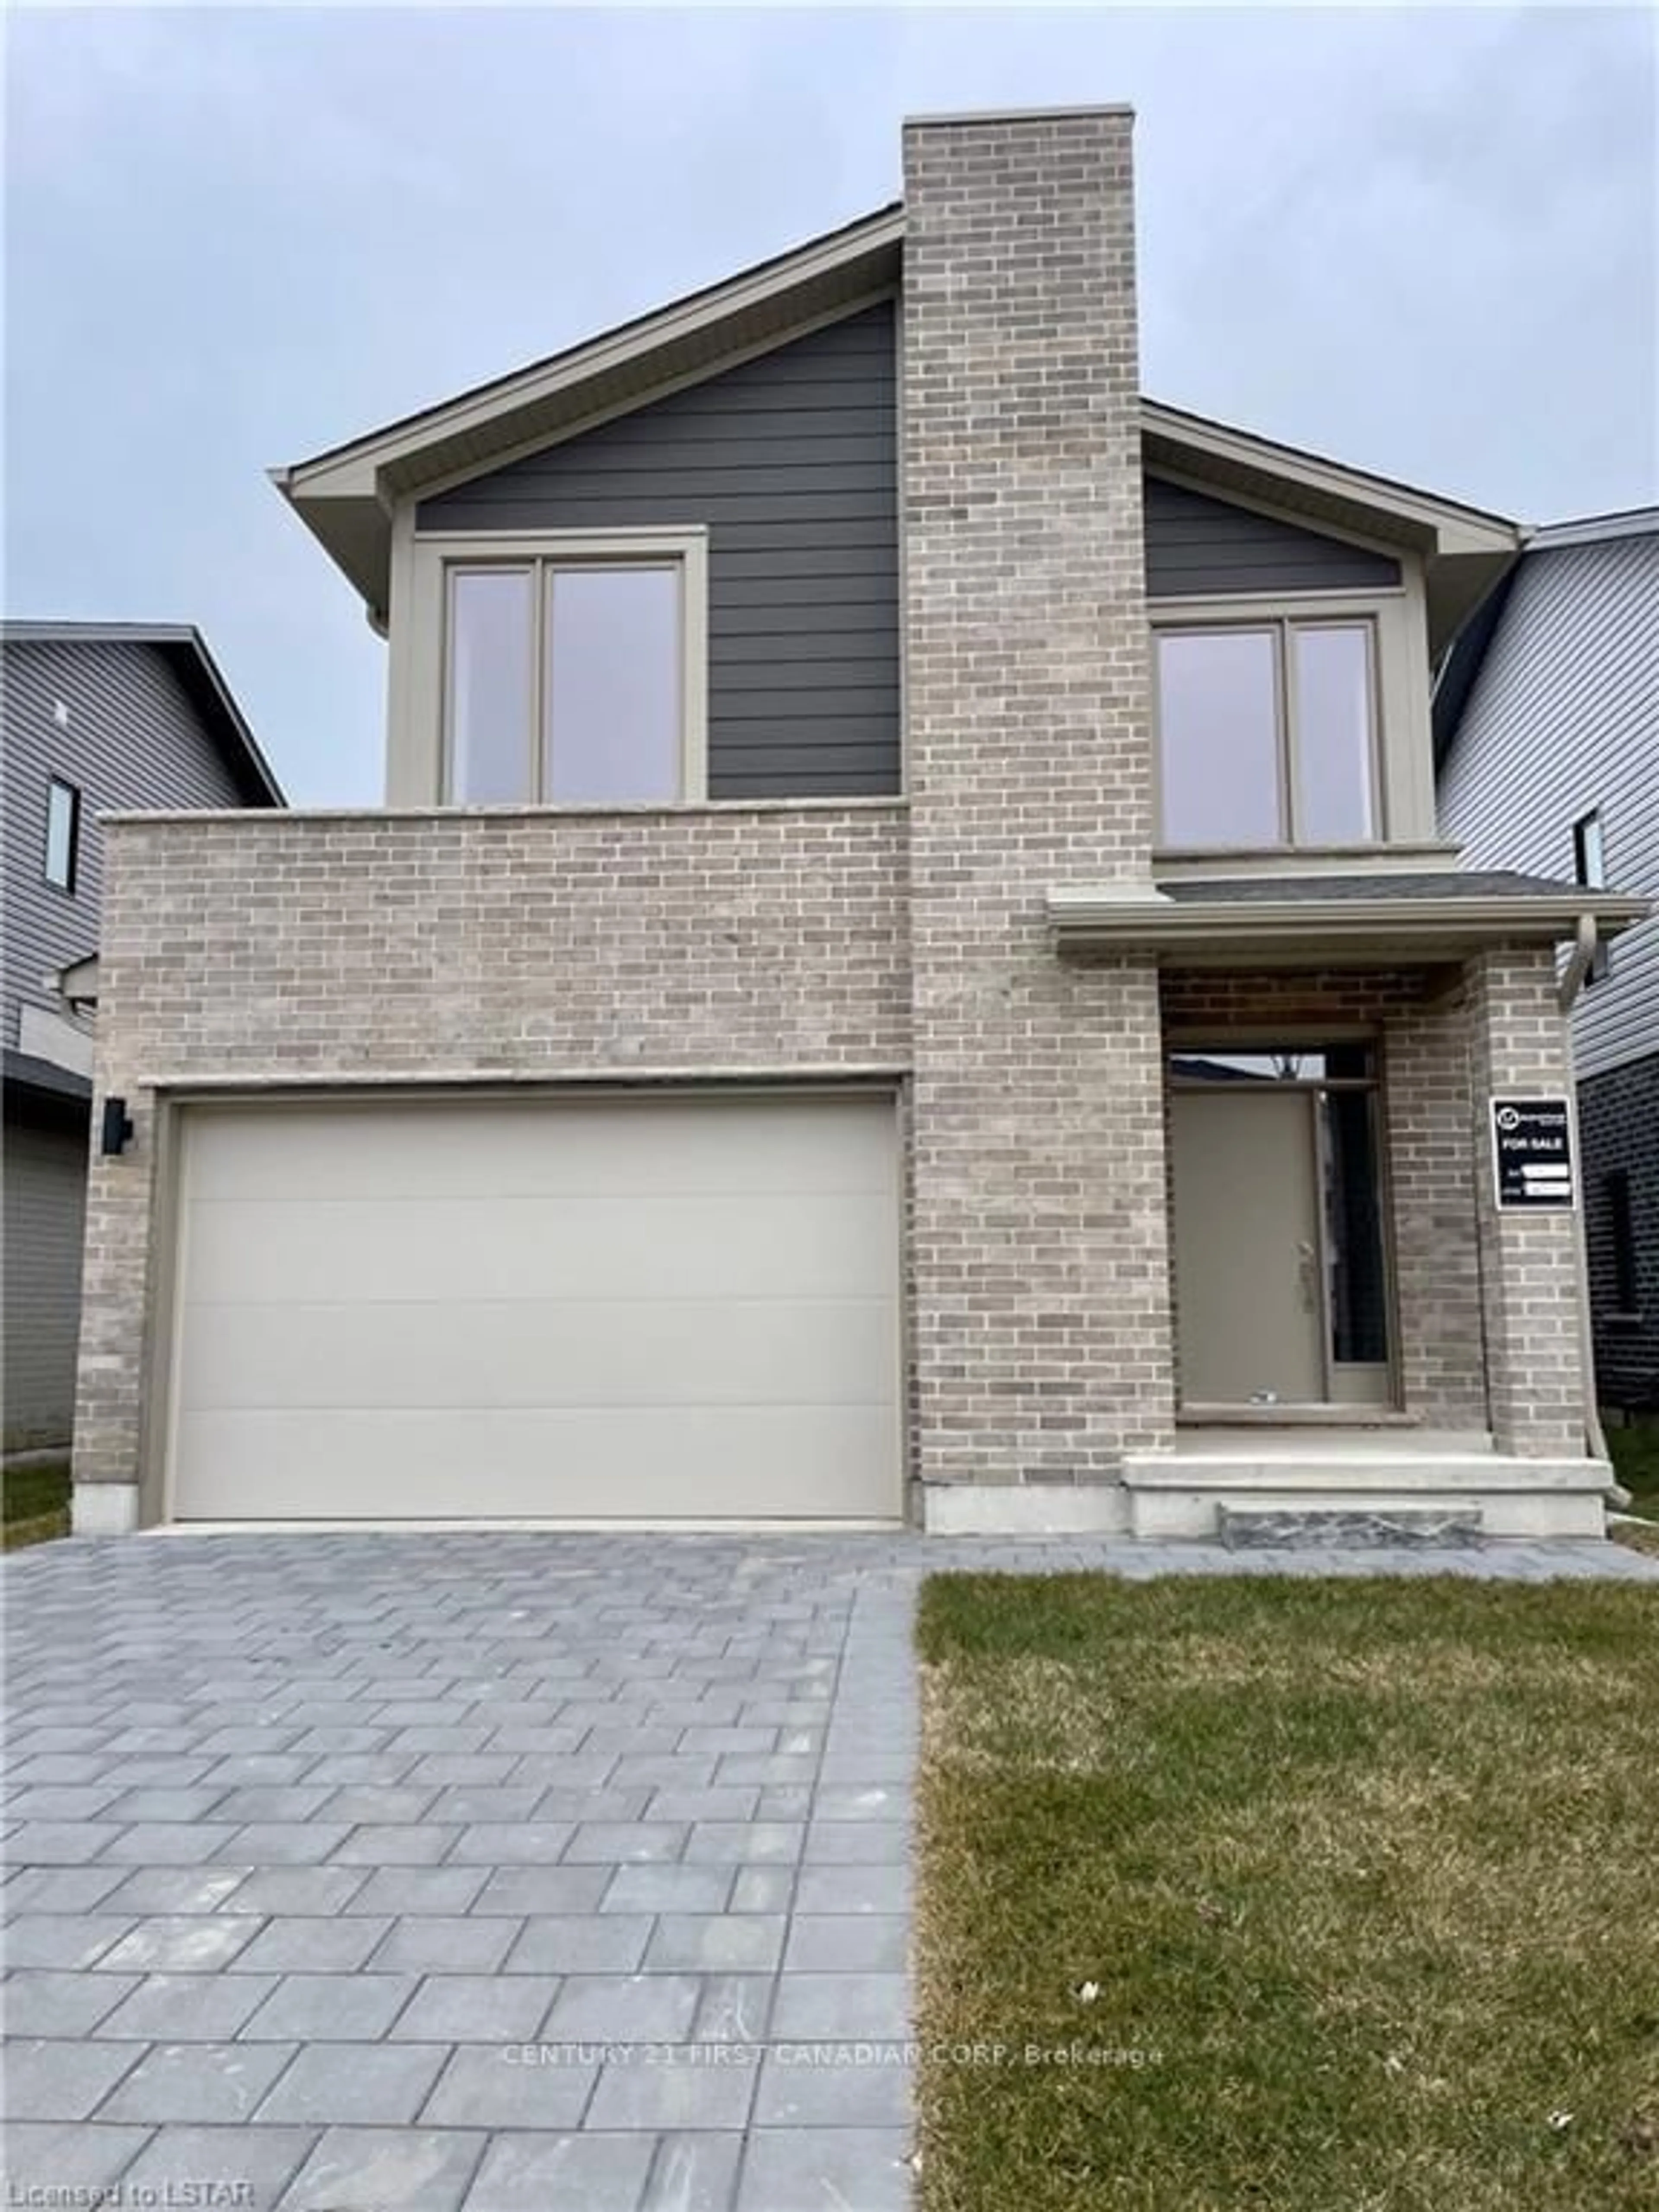 Home with brick exterior material for 2262 Southport Cres #32, London Ontario N6M 0H9